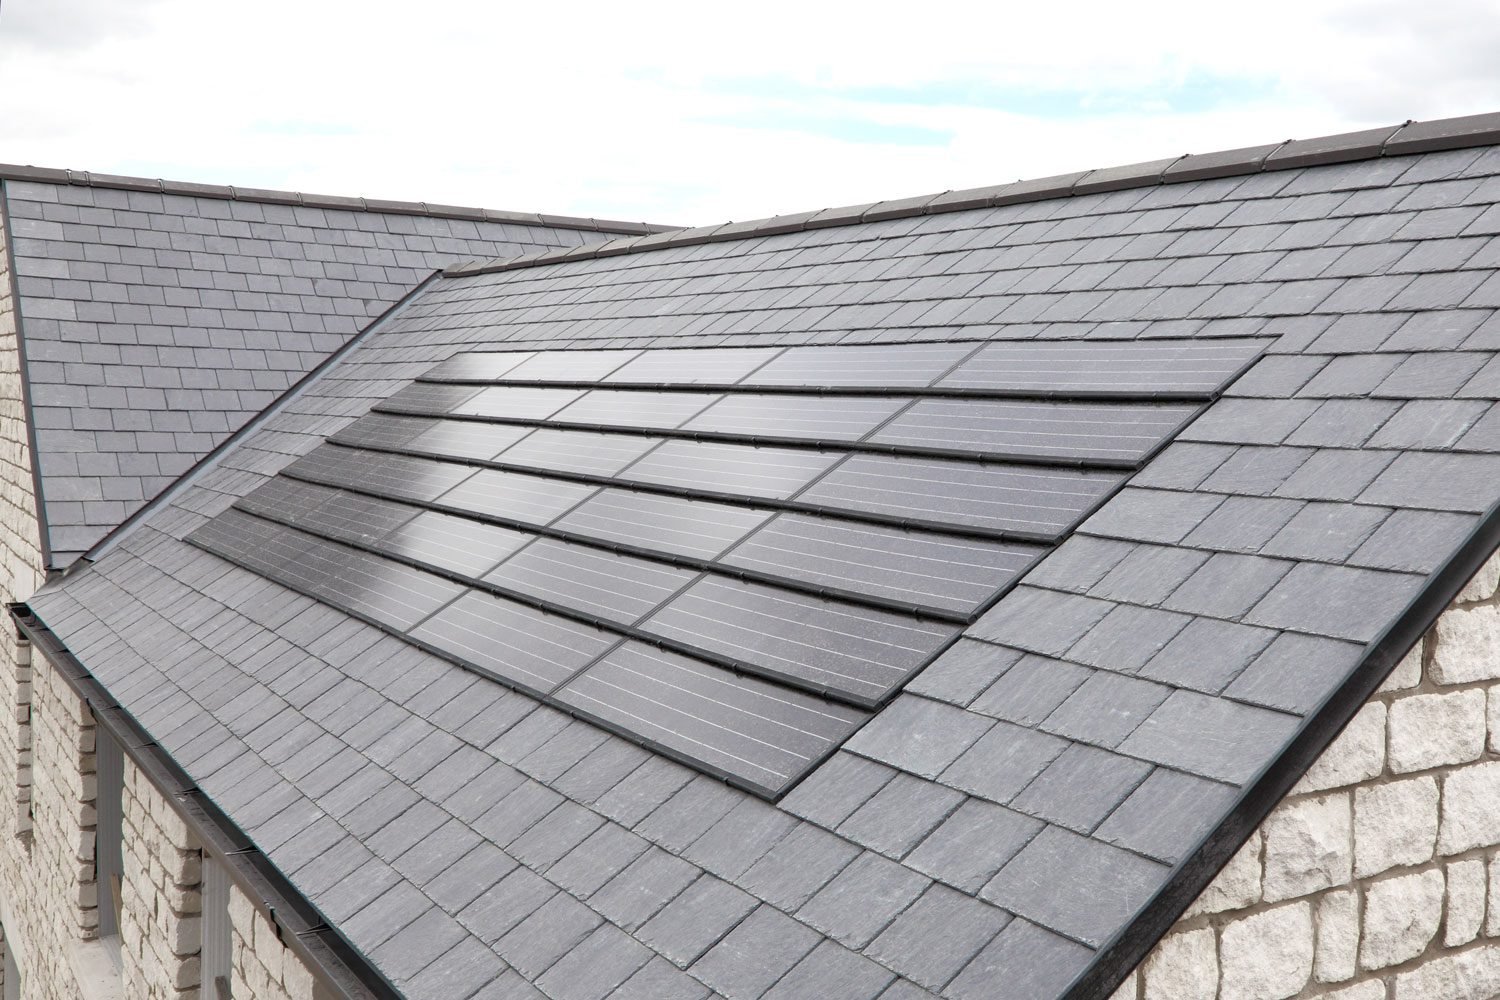 A new set of solar panels which blend in nicely with a black tiled roof.